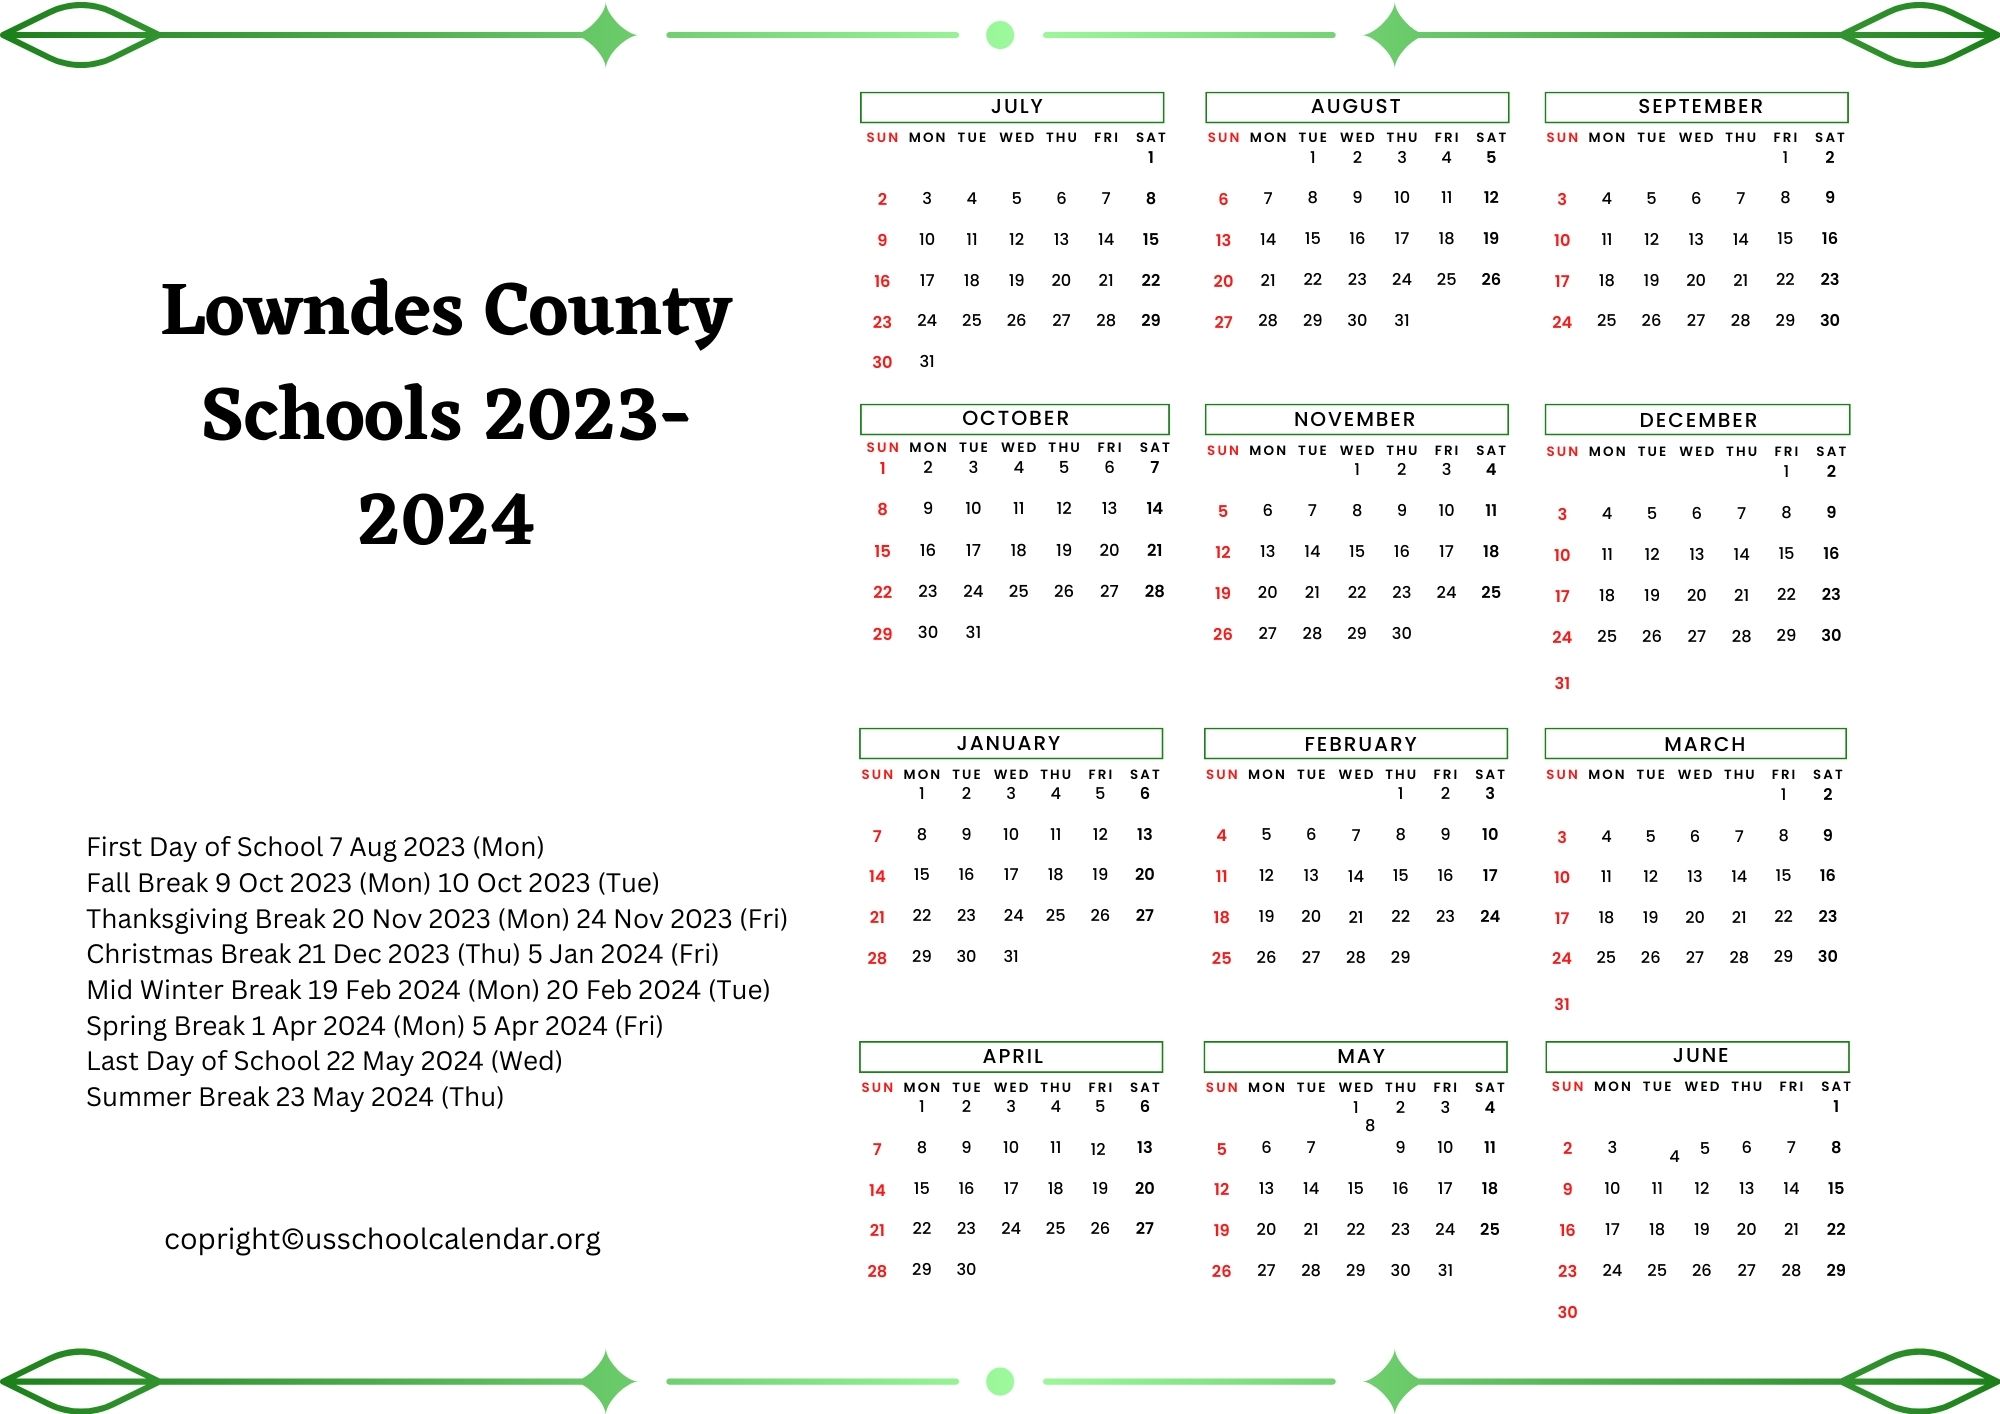 lowndes-county-schools-calendar-with-holidays-2023-2024